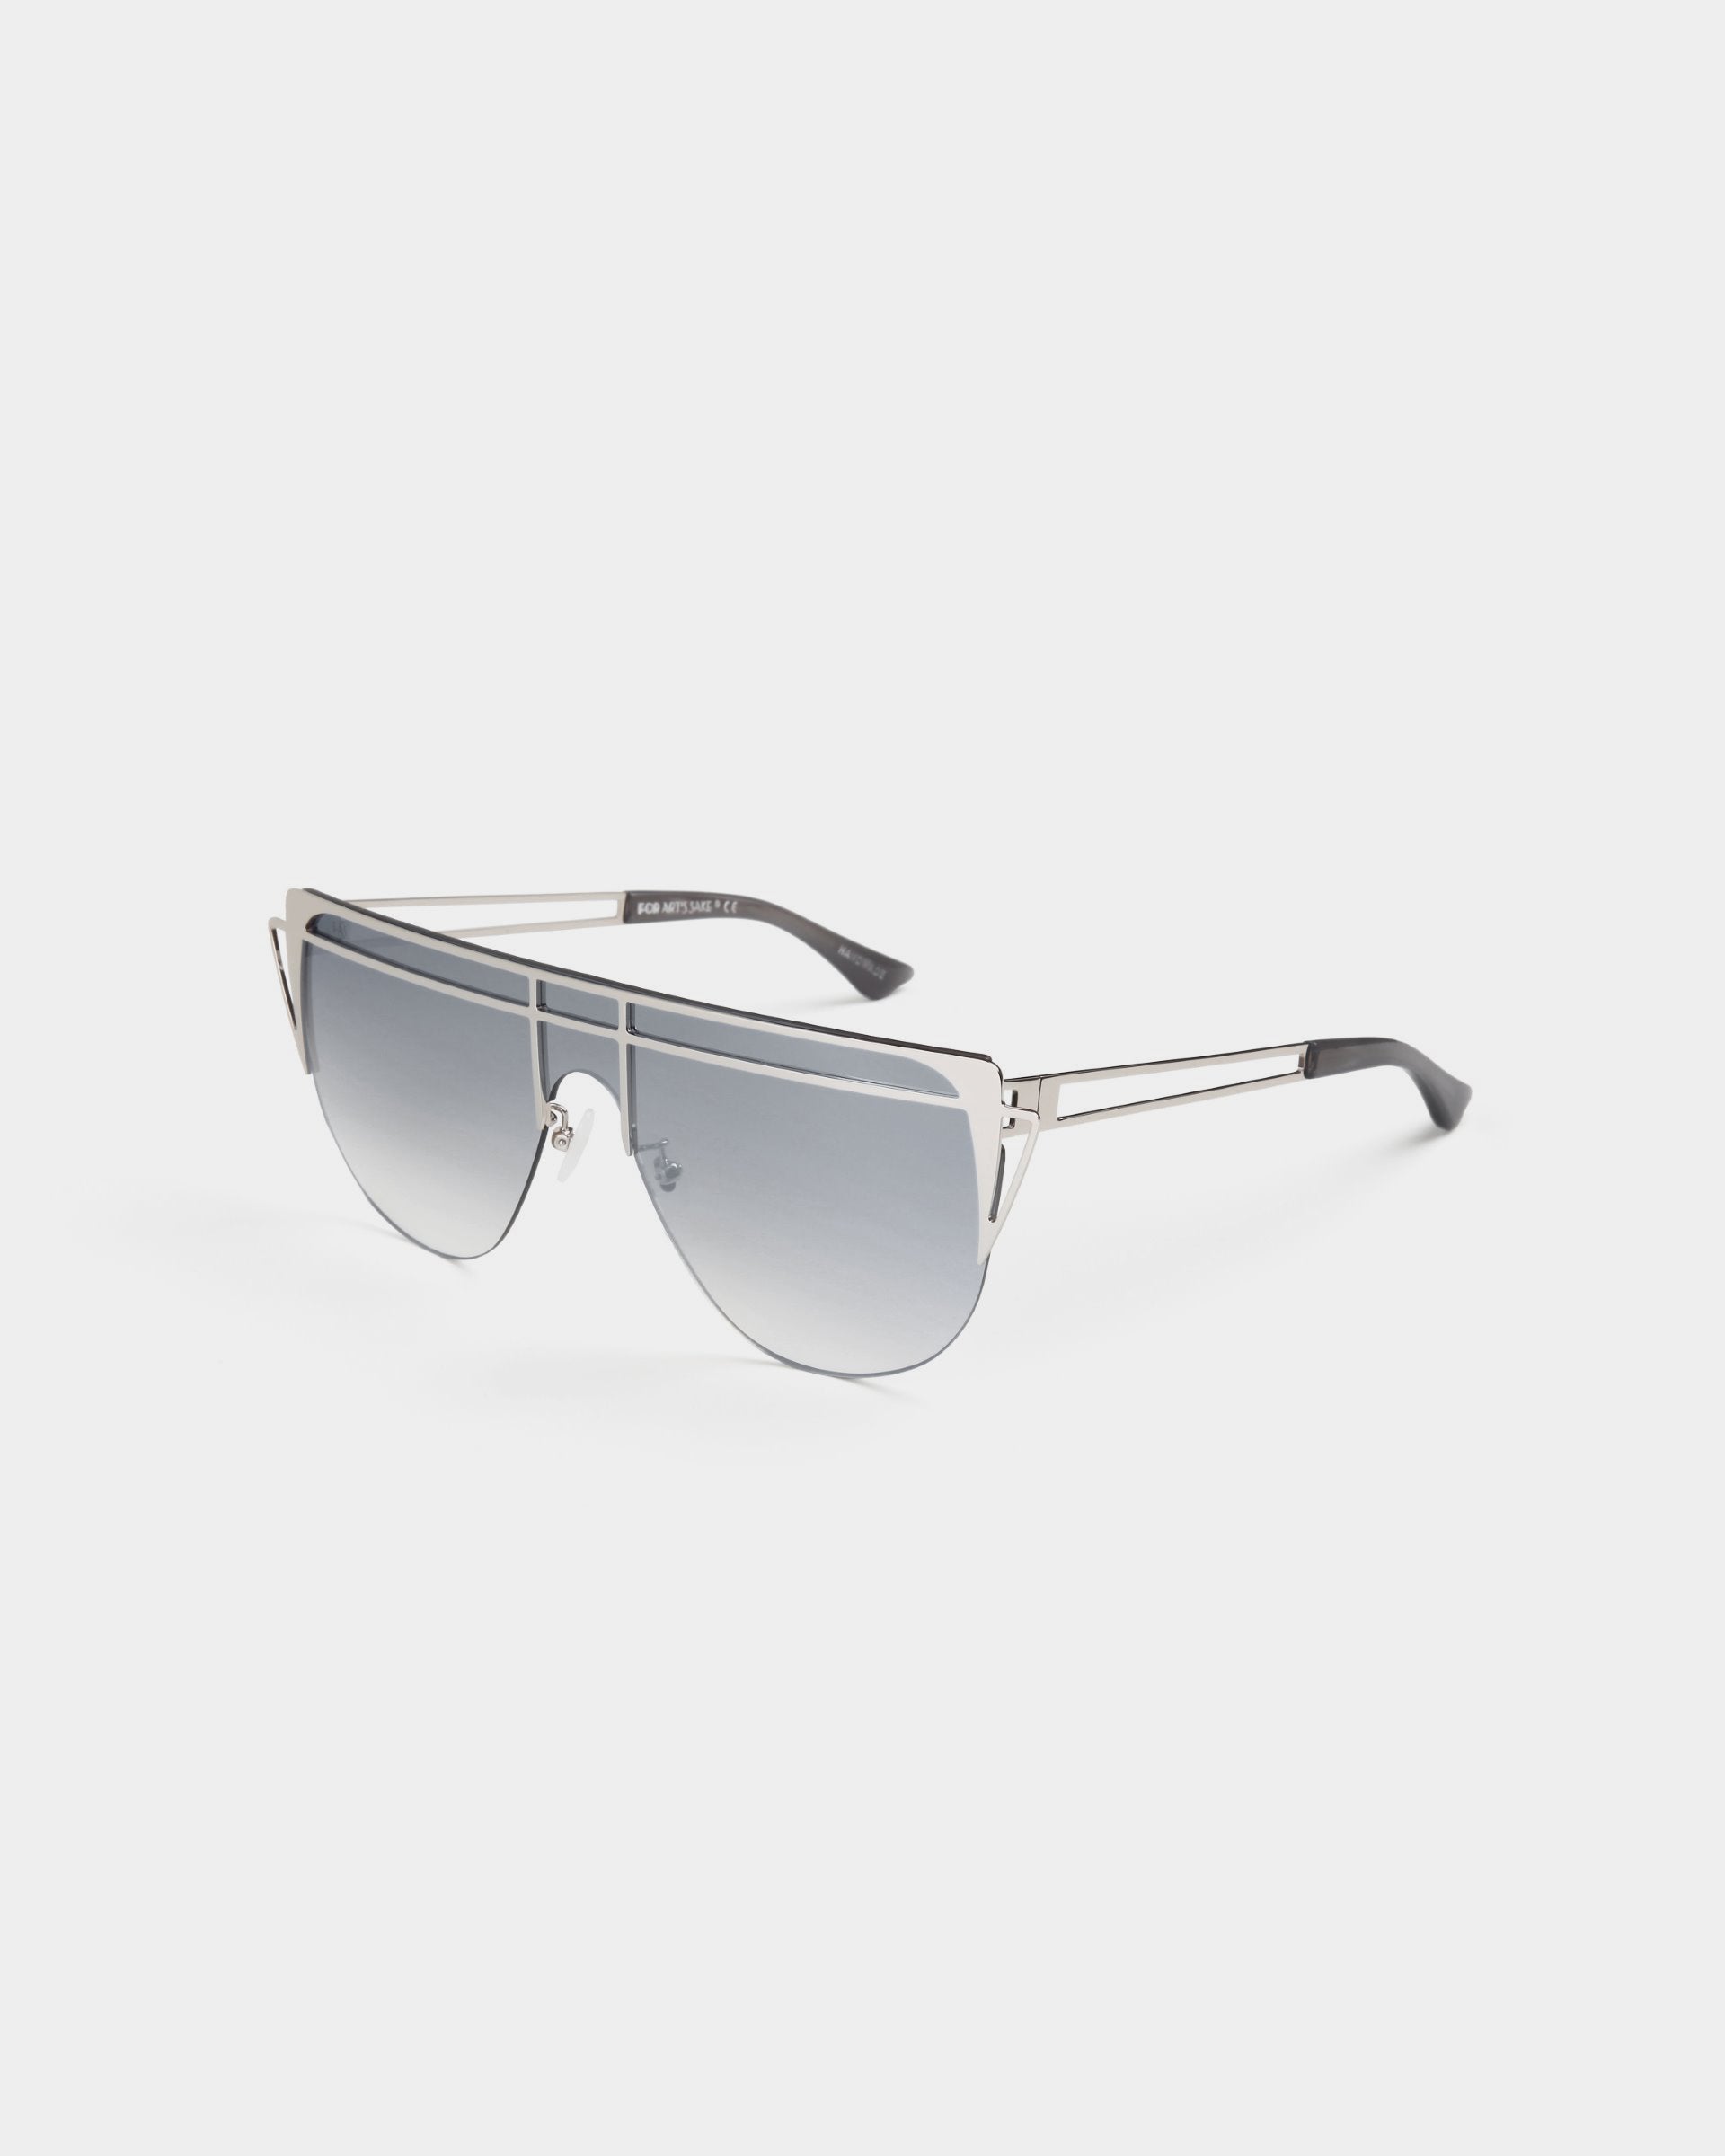 A pair of stylish aviator sunglasses with gradient lenses and a slender, handmade gold-plated stainless steel frame featuring a double bridge. The temples are black at the ends and subtly branded along the arms. The nose pads are adjustable for a comfortable fit, offering 100% UV protection. These are the Alien sunglasses by For Art&#39;s Sake®.